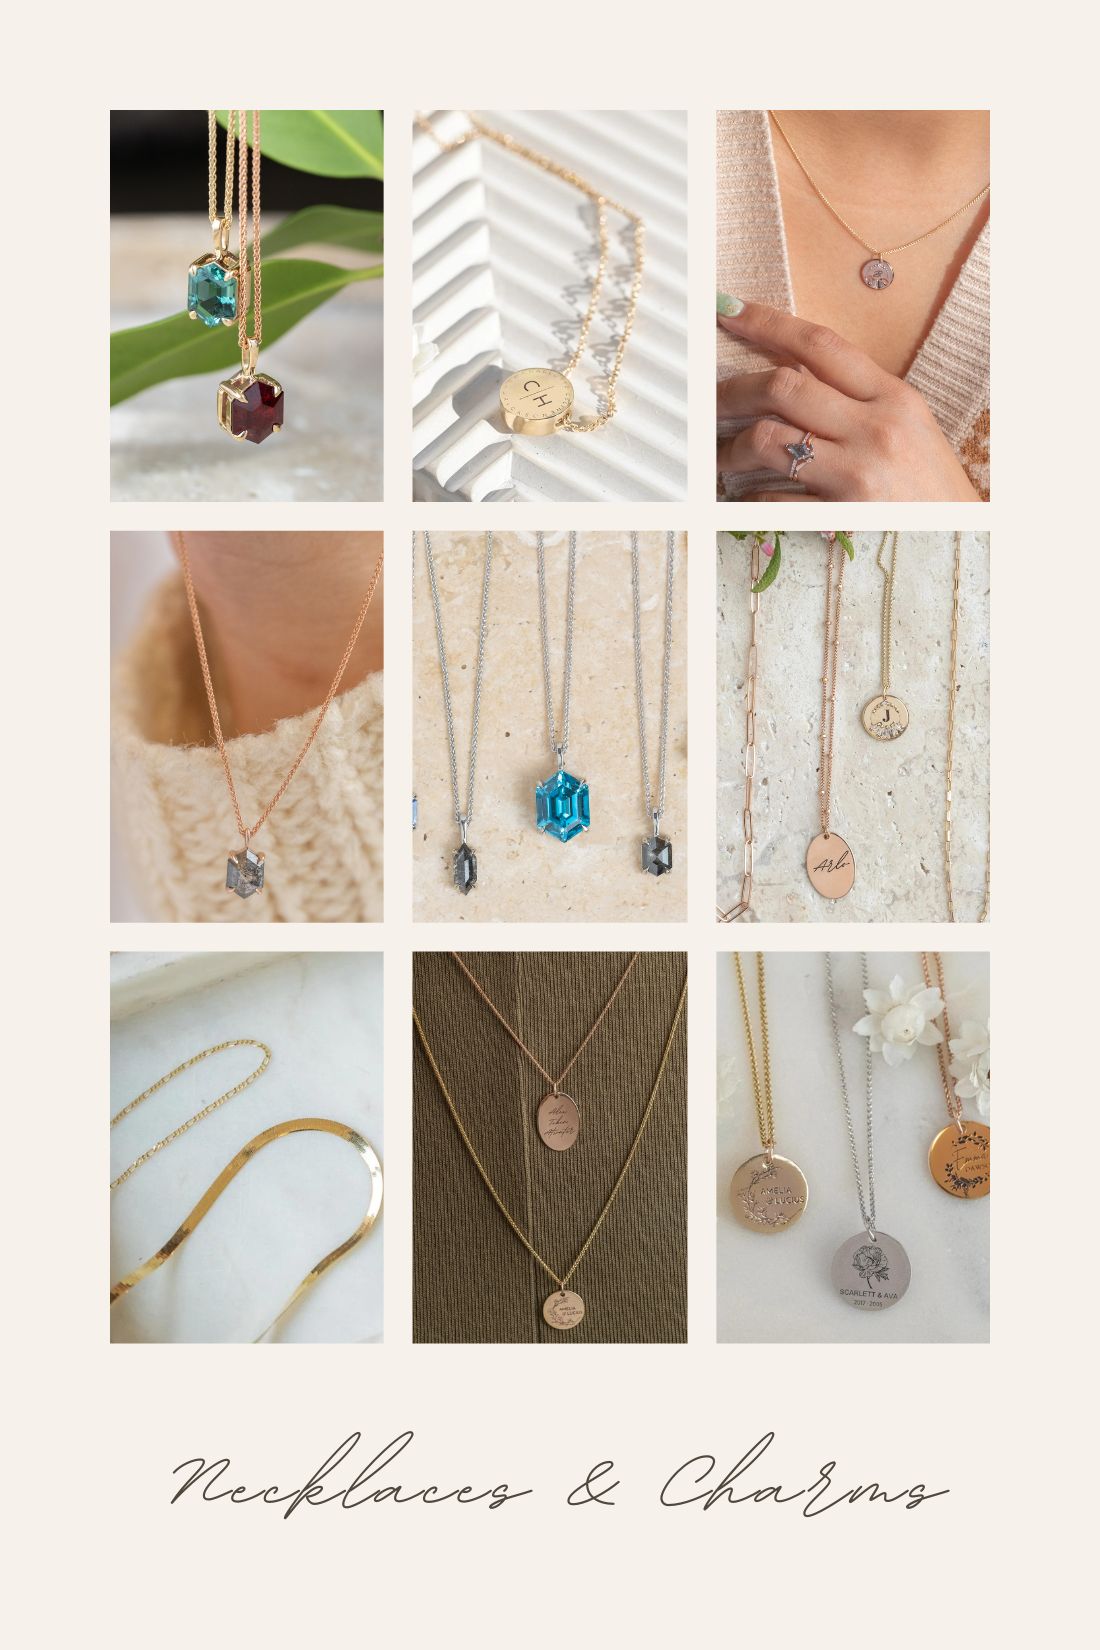 necklaces, initial charms, pendants from point no point studio to make this valentine's day extra special